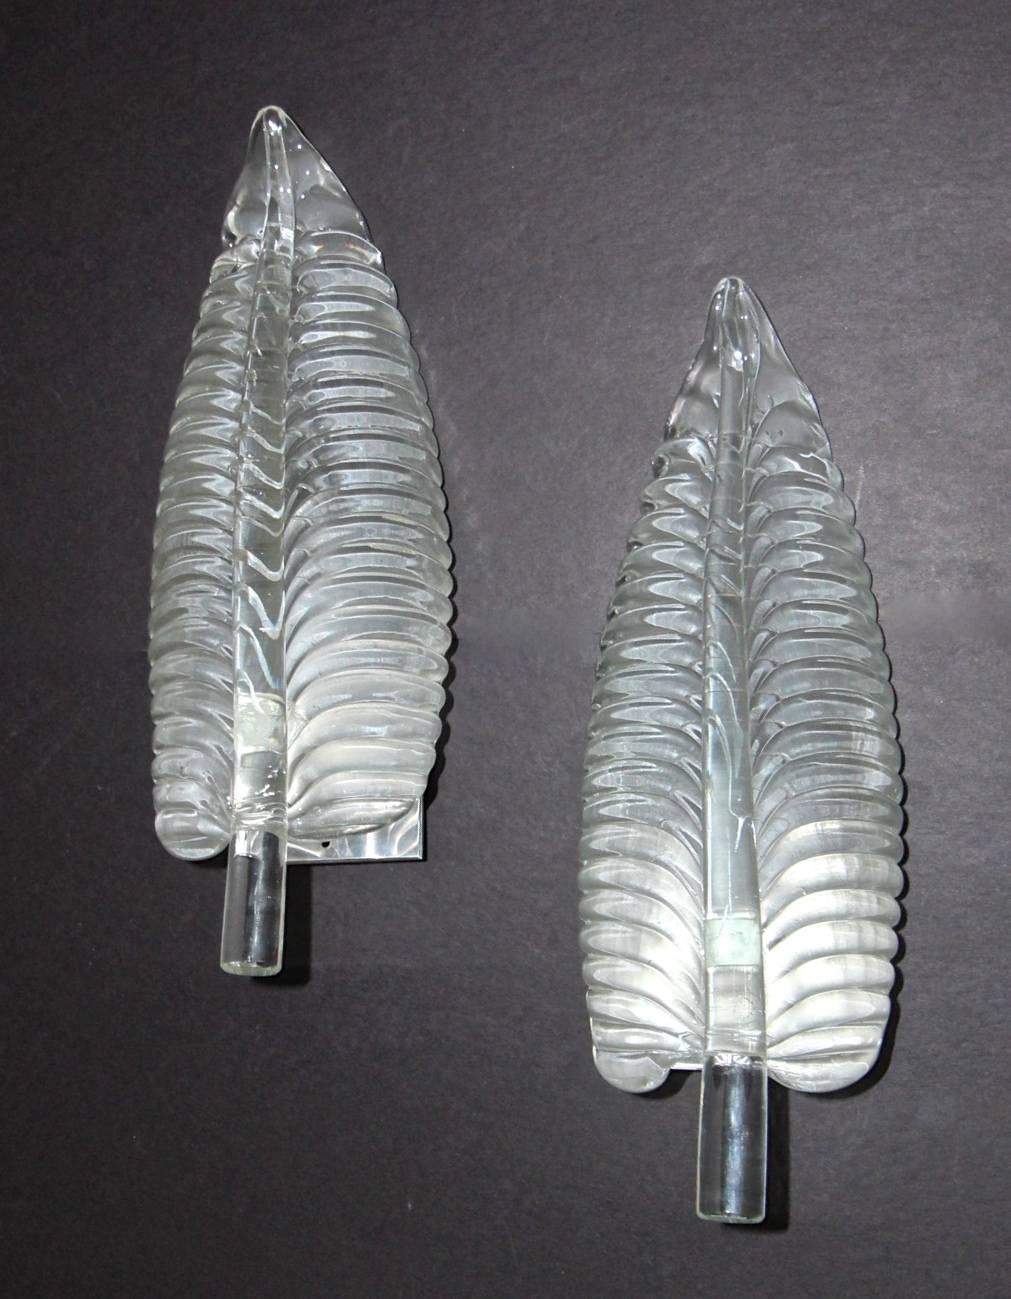 Pair of large heavy thick blown clear glass leaf Murano wall sconces. Backside of glass is satin textured providing a more even opaque light. Nickel backplates. Each sconce uses a single 60 watt max a base bulb. Rewired.